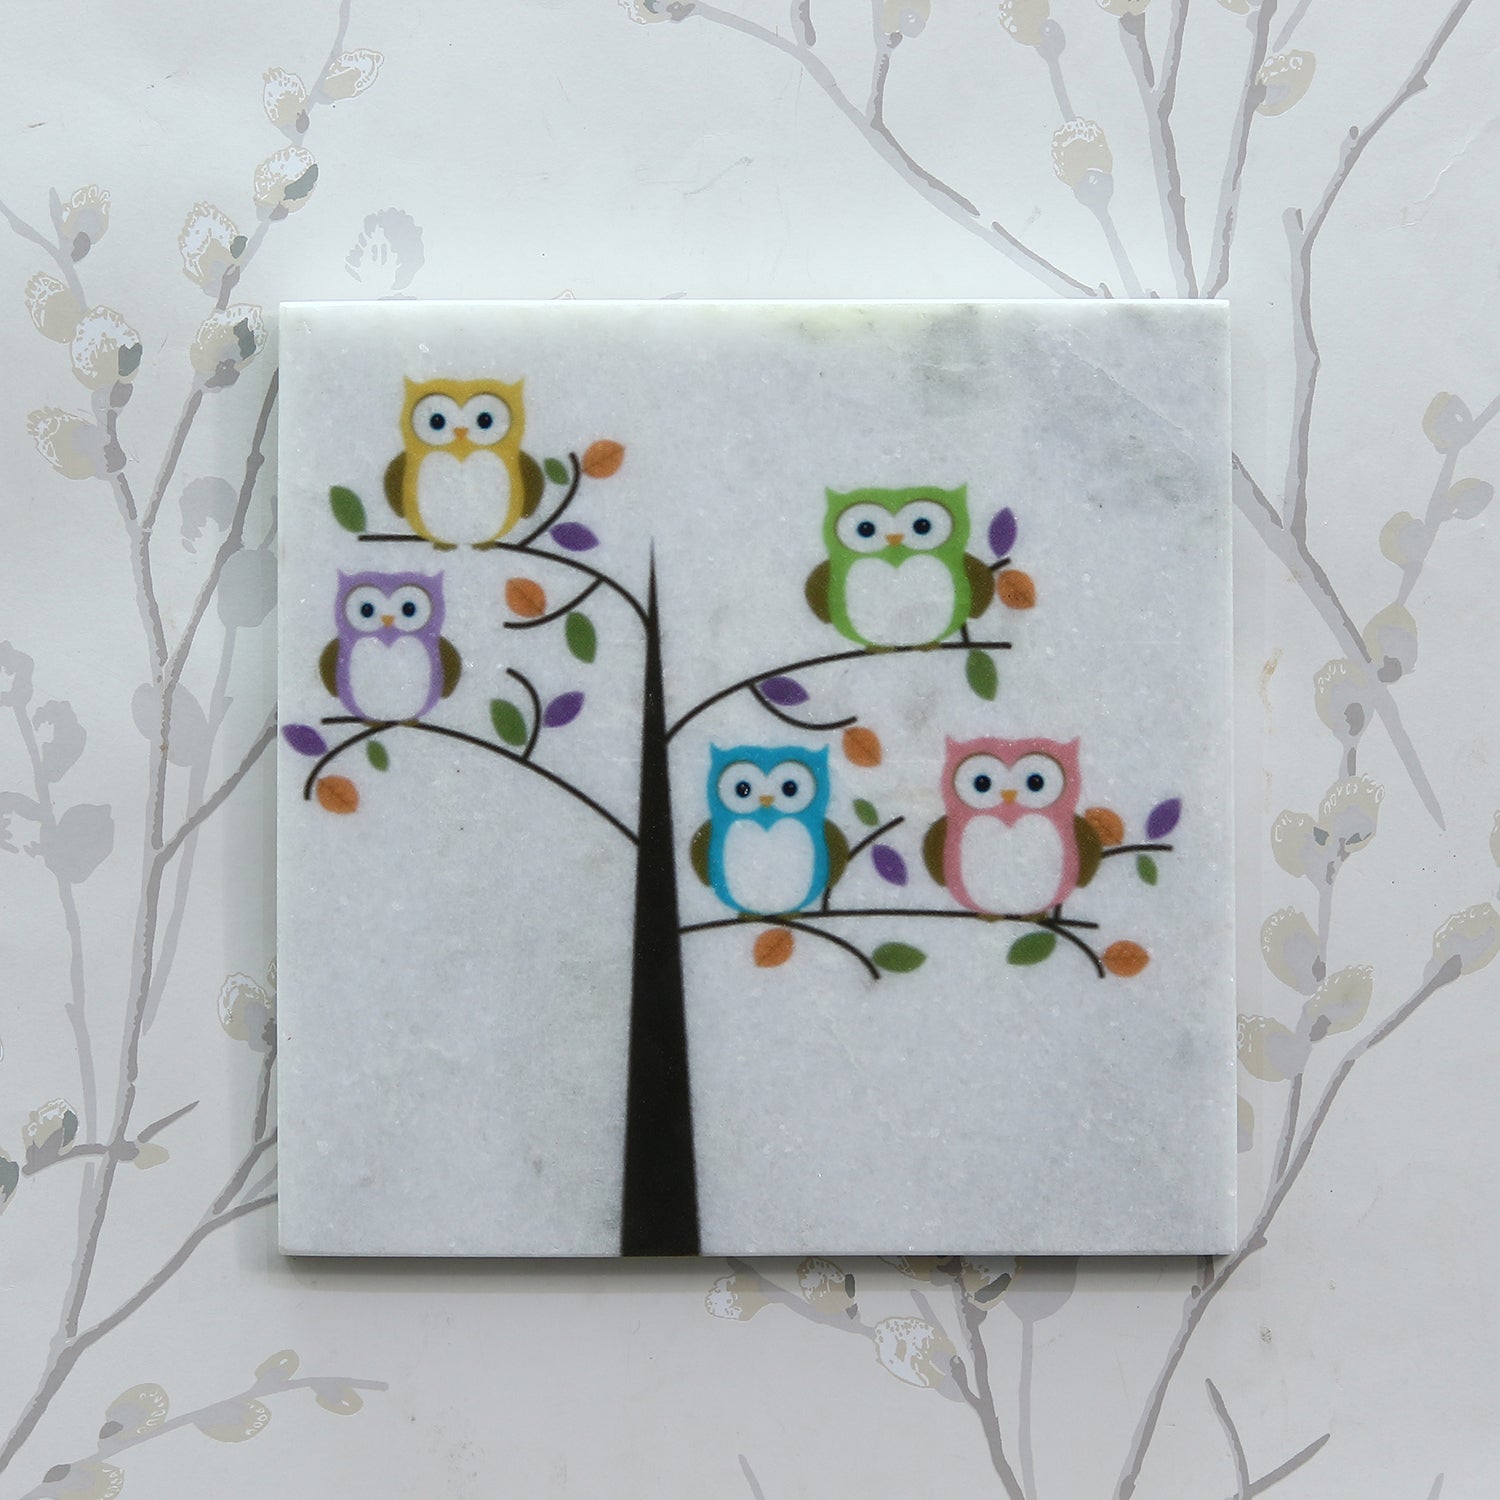 Colorful Owls sitting on a Tree Painting On Marble Square Tile